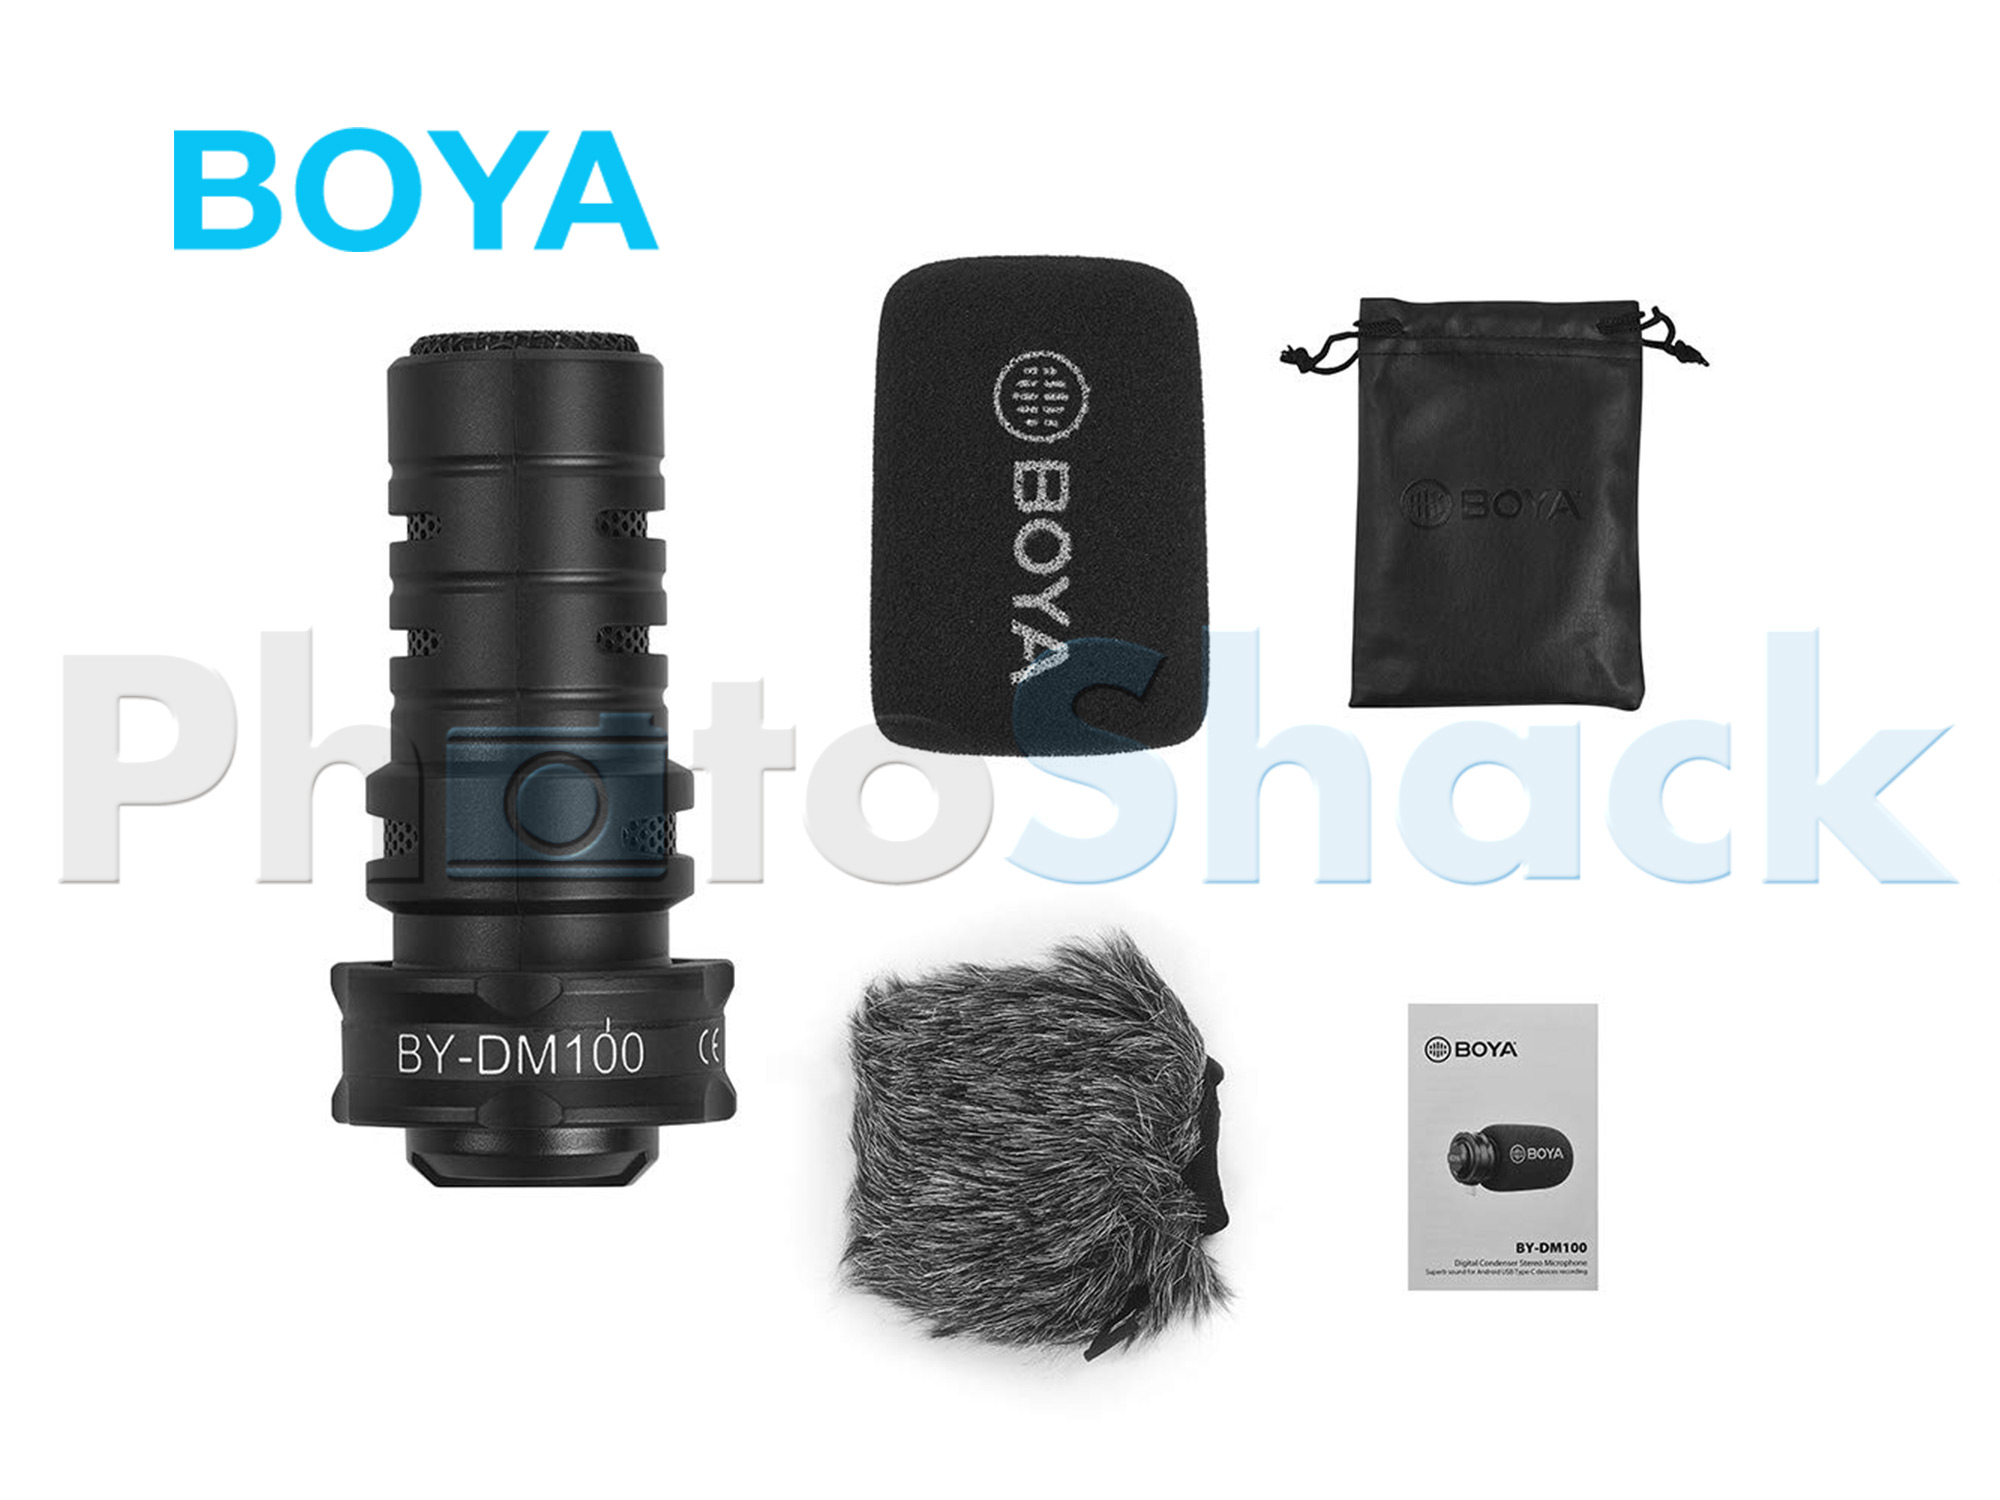 Boya Type-C Shotgun microphone (for Android devices)